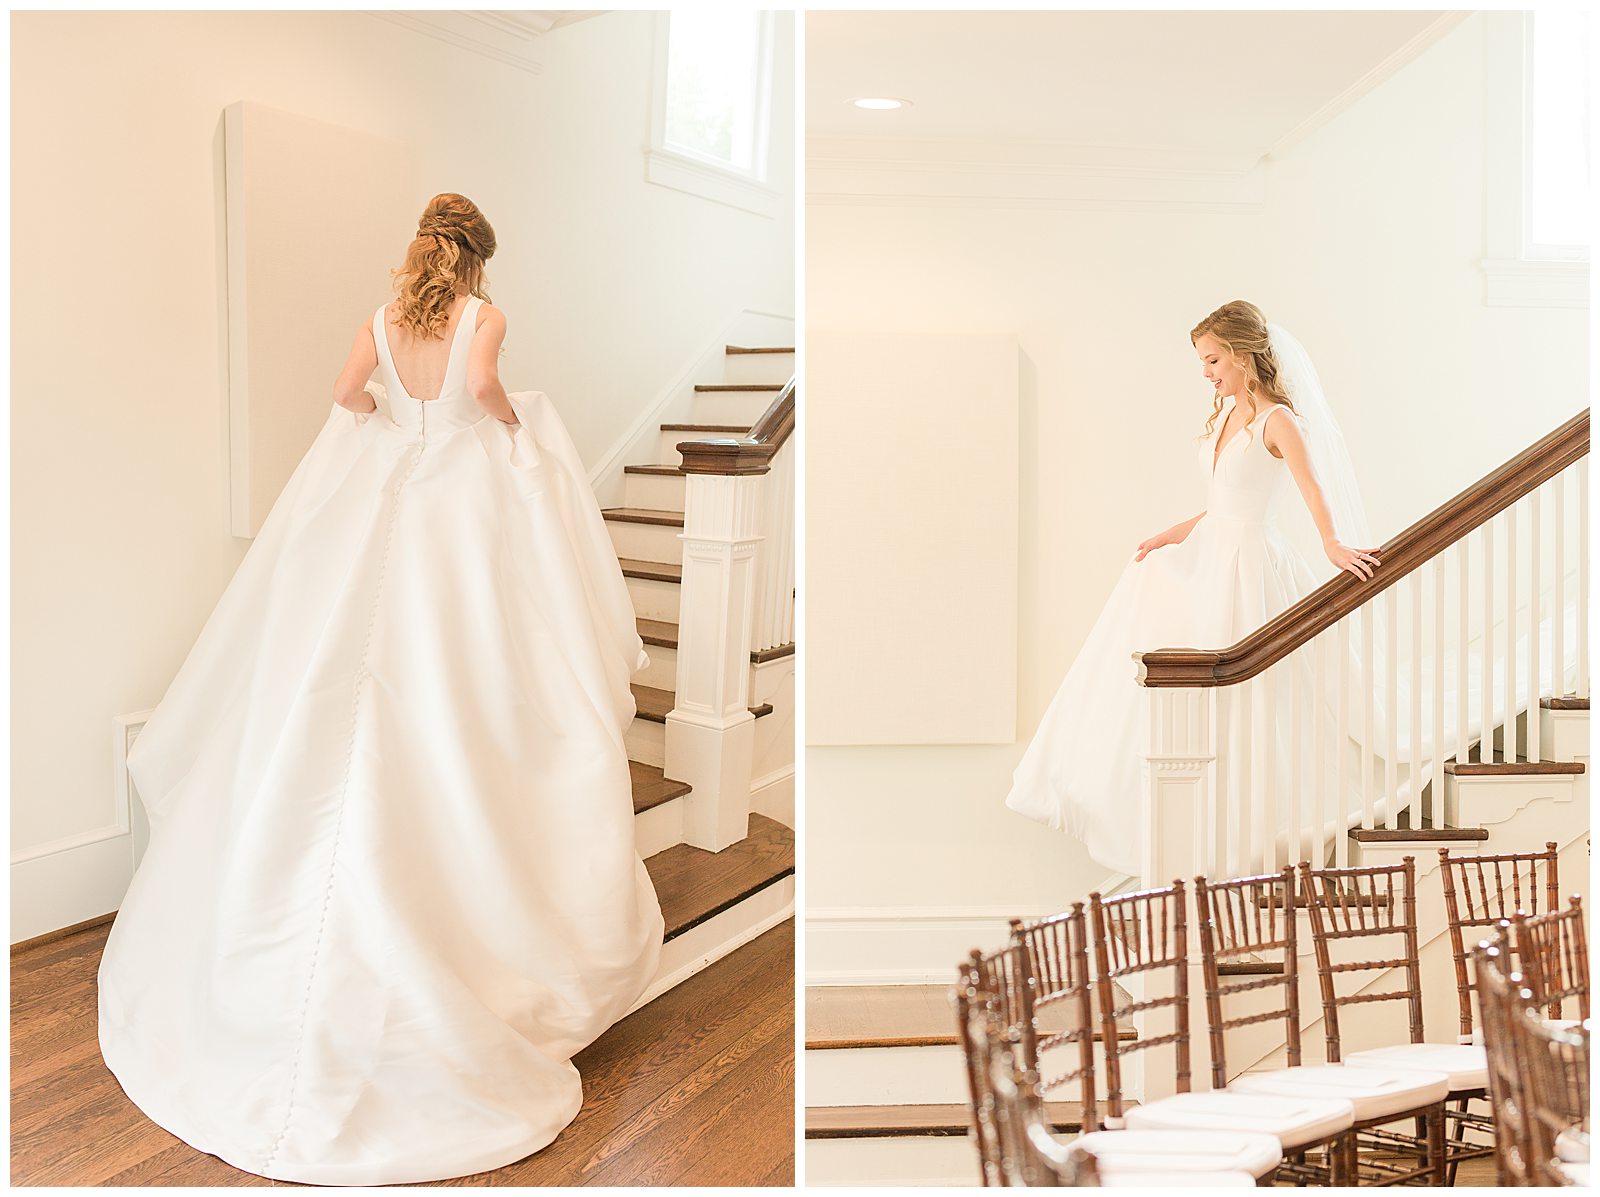 bride on historic staircase, gown flows out behind her